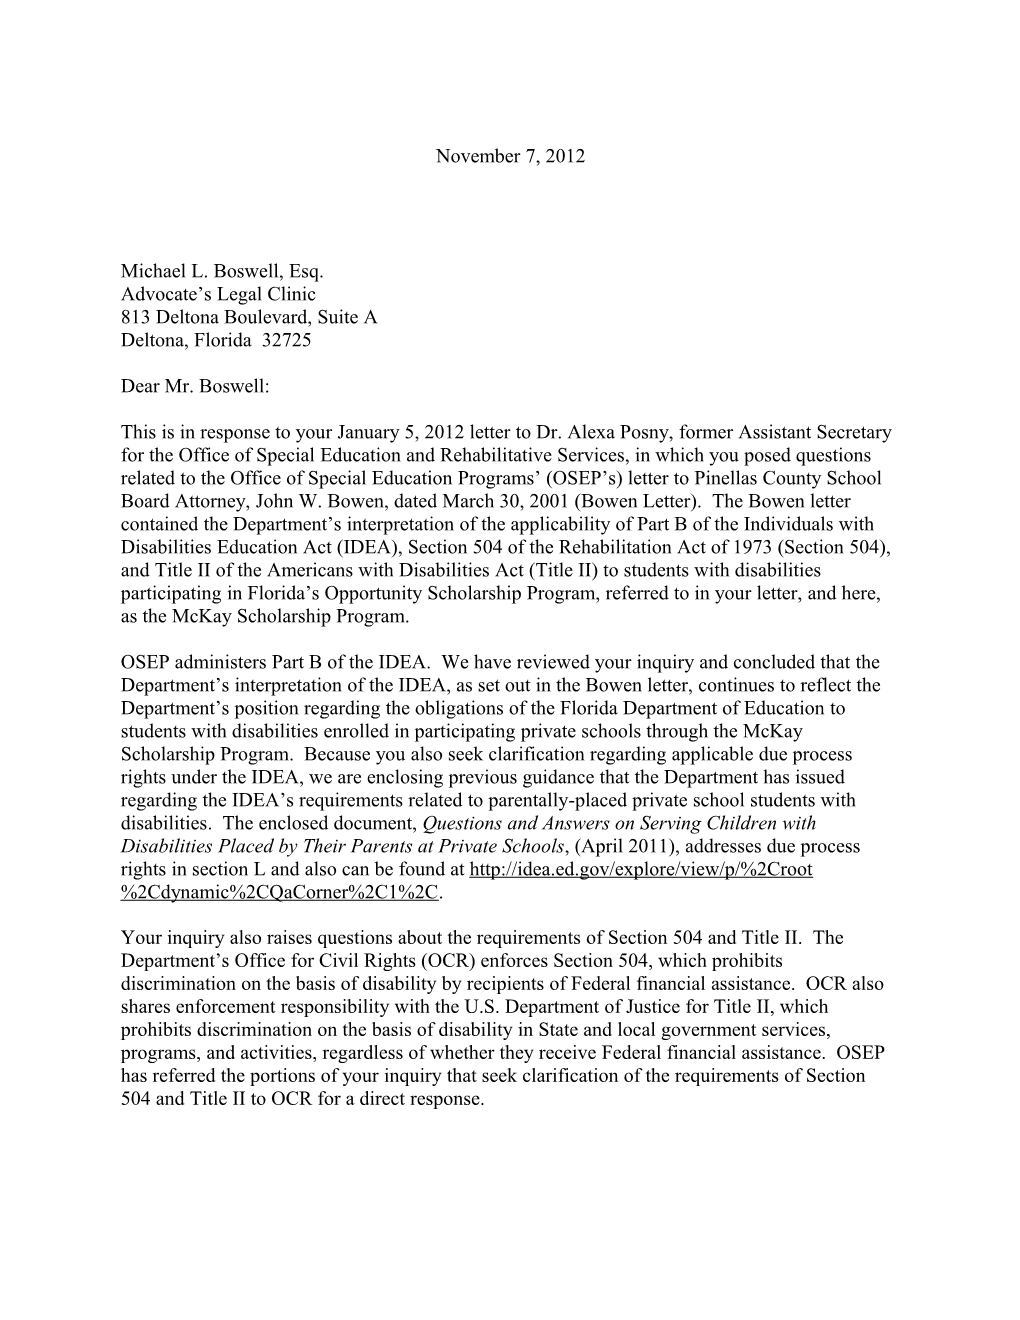 Policy Letter to Michael L. Boswell